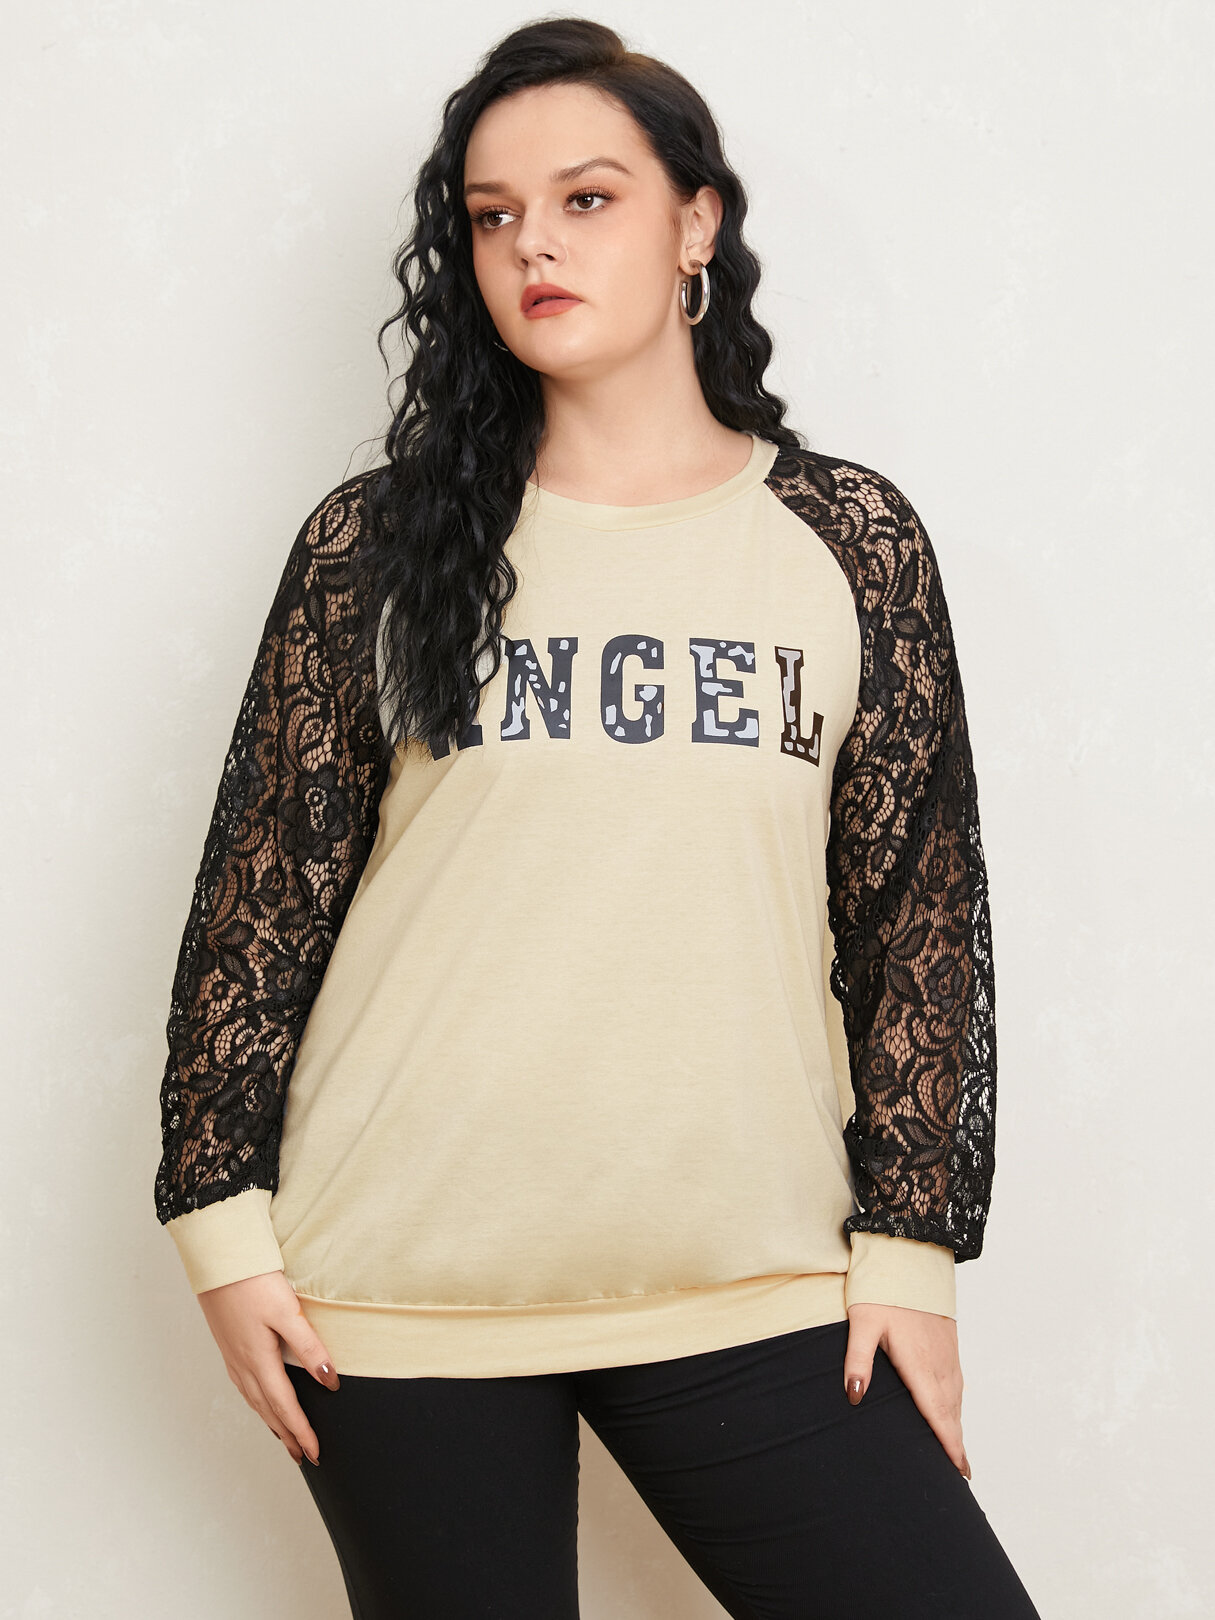 Plus Size Crew Neck Letter Patchwork Design Long Sleeves Tee